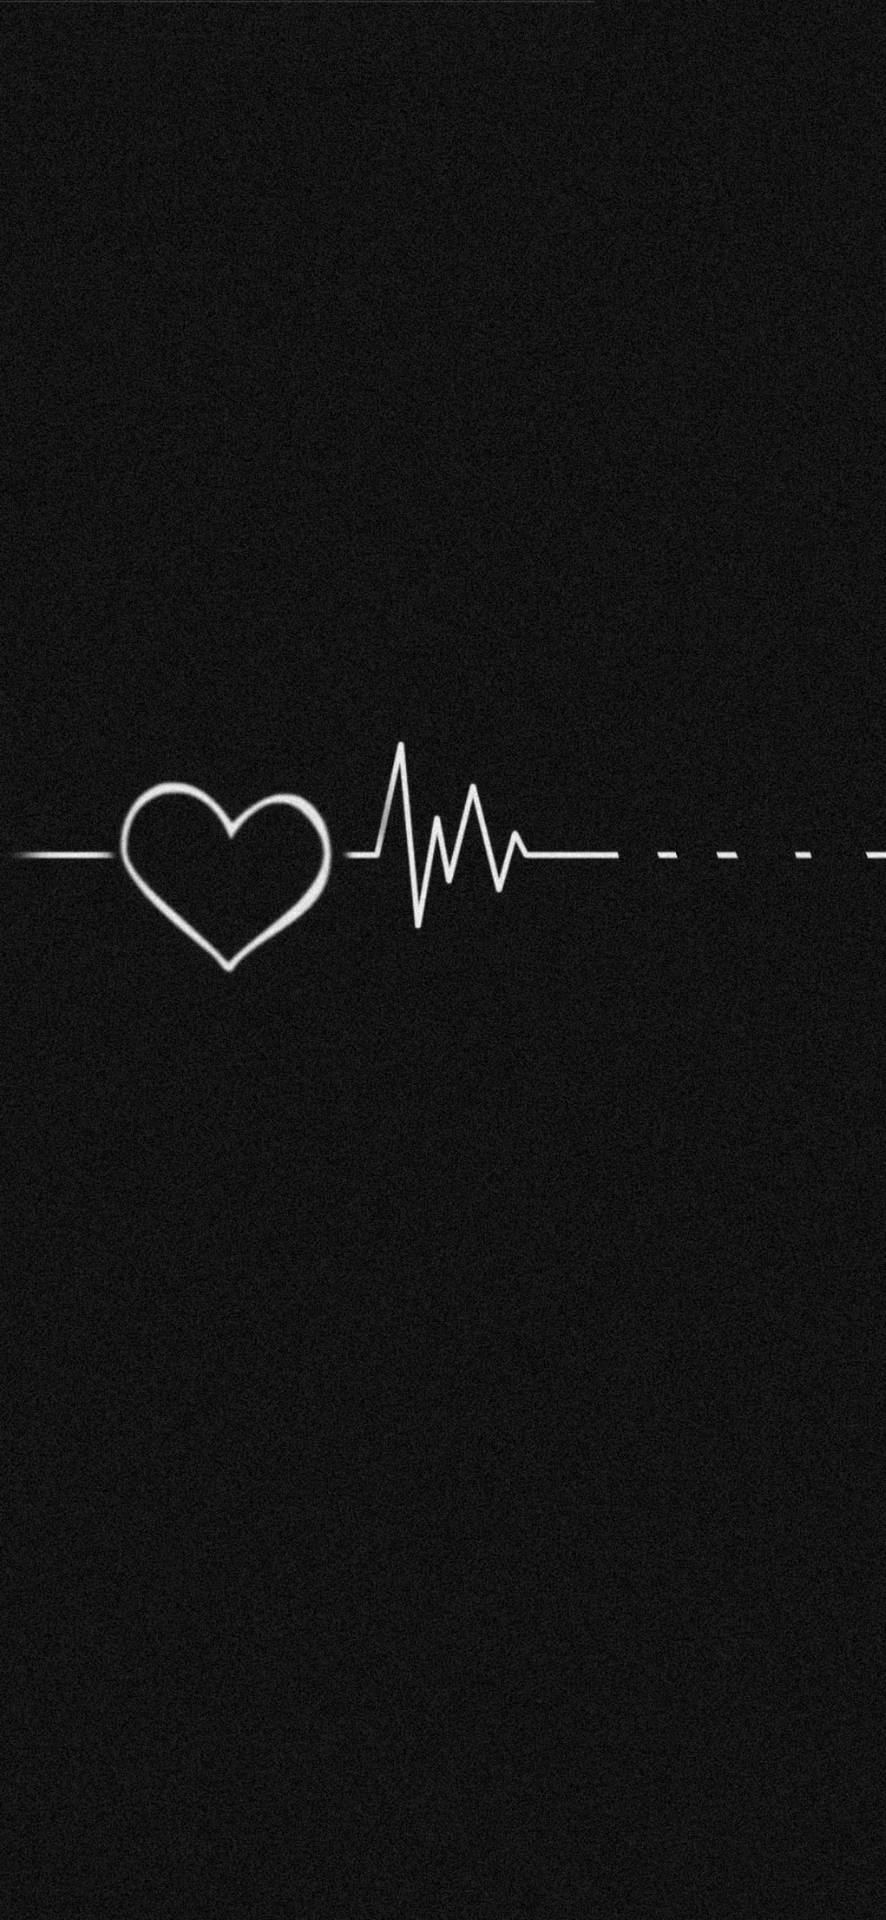 Black Heart Aesthetic With Pulse Rate Wallpaper